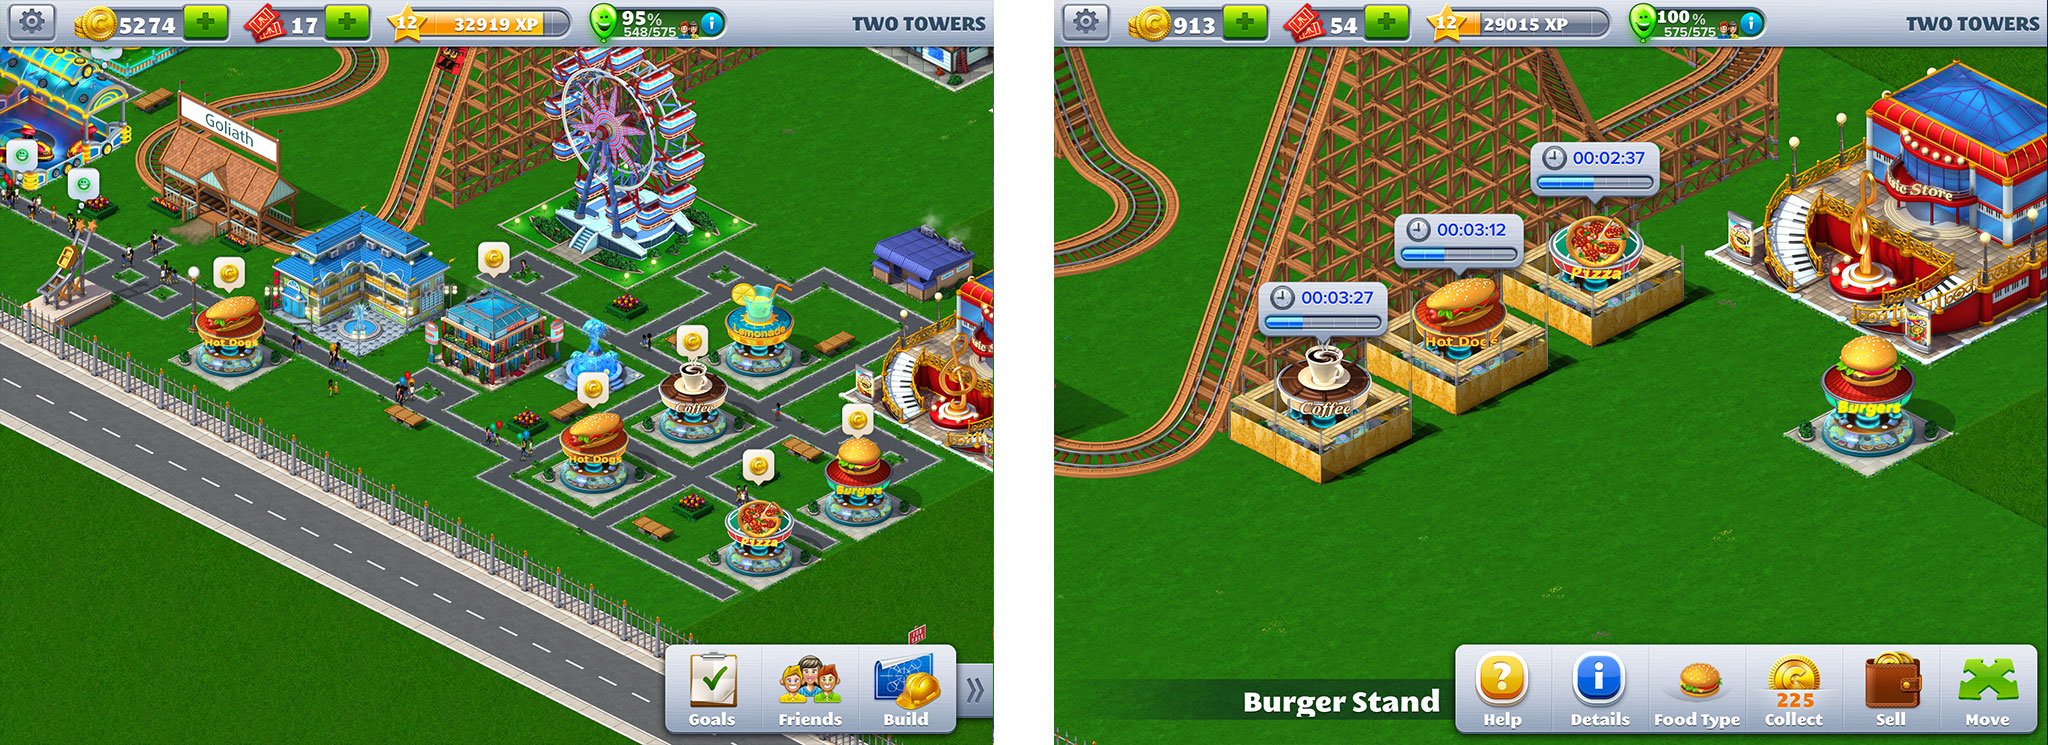 Roller Coaster Tycoon 4: Top 10 tips, hints, and cheats you need to know!